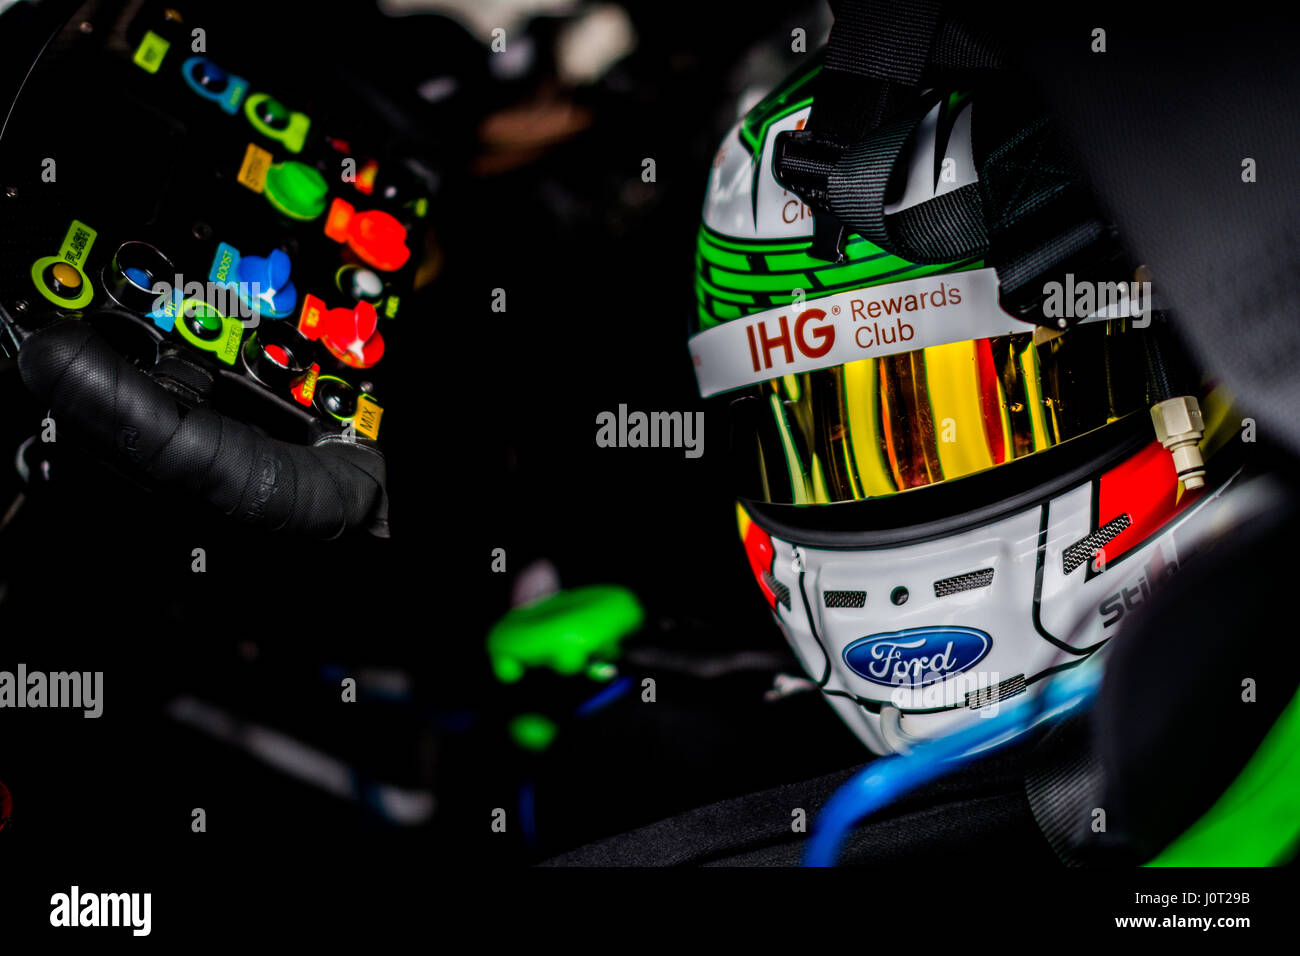 Towcester, Northamptonshire, UK. 16th April, 2017. FIA WEC racing driver Andy Priaulx (GBR) and Ford Chip Ganassi Team UK helmet before the 6 Hours of Silverstone of the FIA World Endurance Championship Autograph session at Silverstone Circuit Photo by Gergo Toth / Alamy Live News Stock Photo